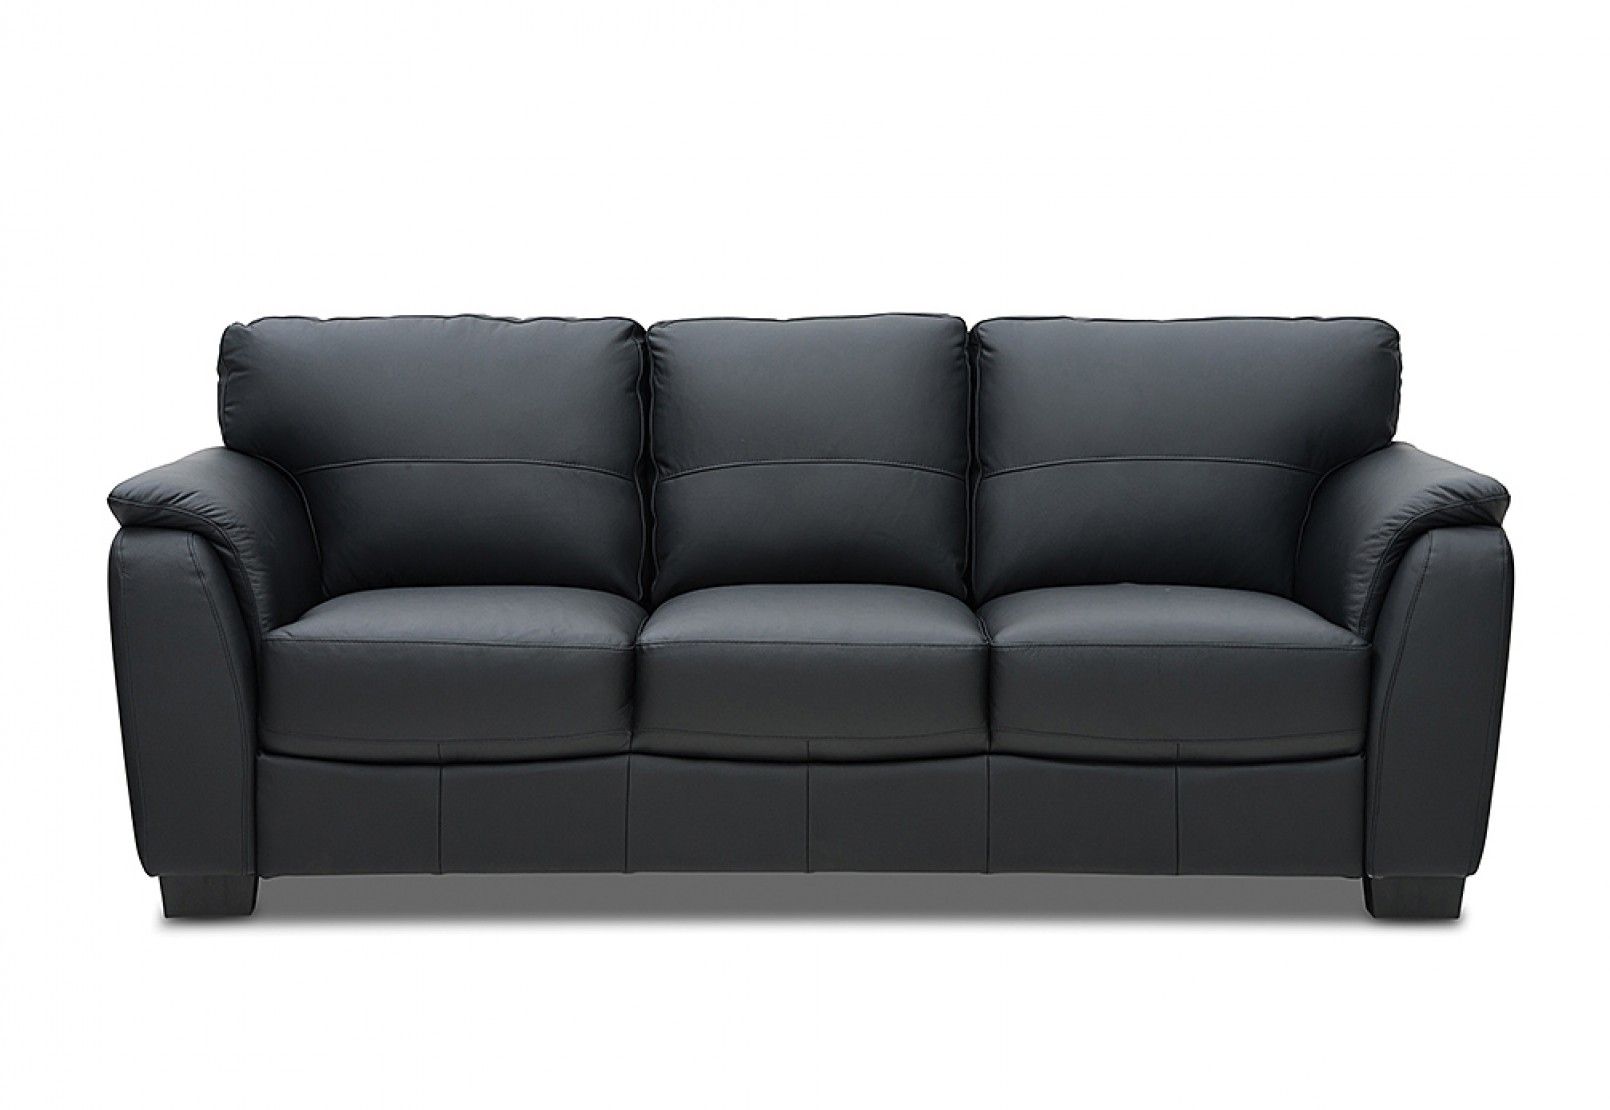 Marissa Leather 3 Seater Sofa | Amart Furniture With Regard To Marissa Sofa Chairs (View 1 of 20)